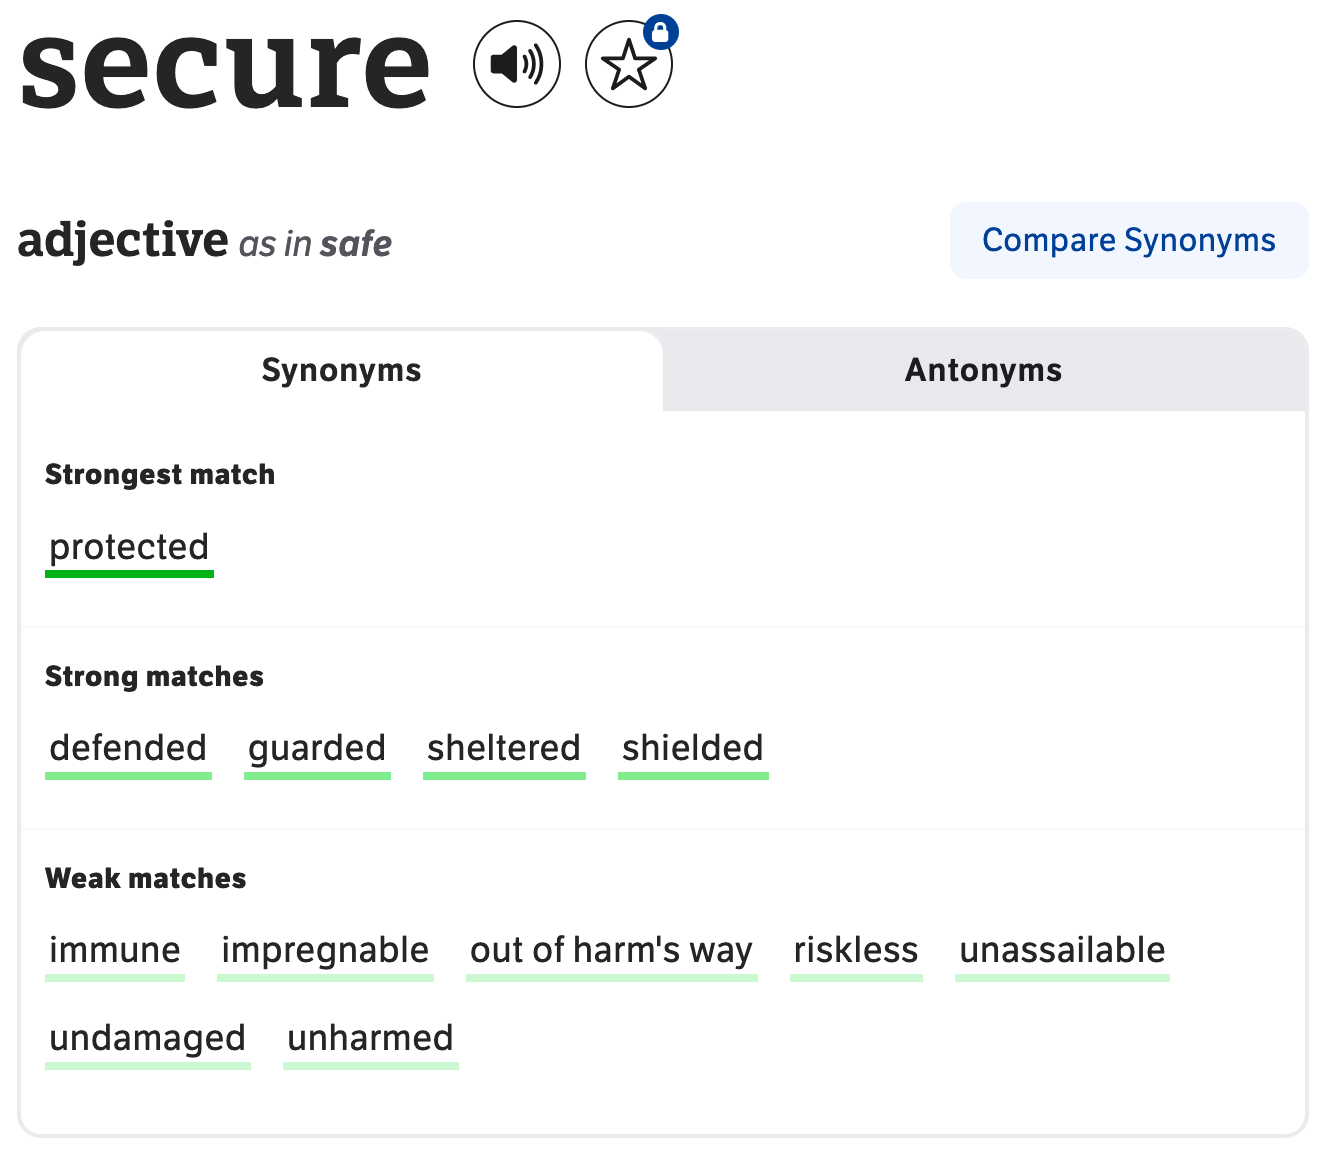 Thesaurus lookup of the word secure and a few alternatives.